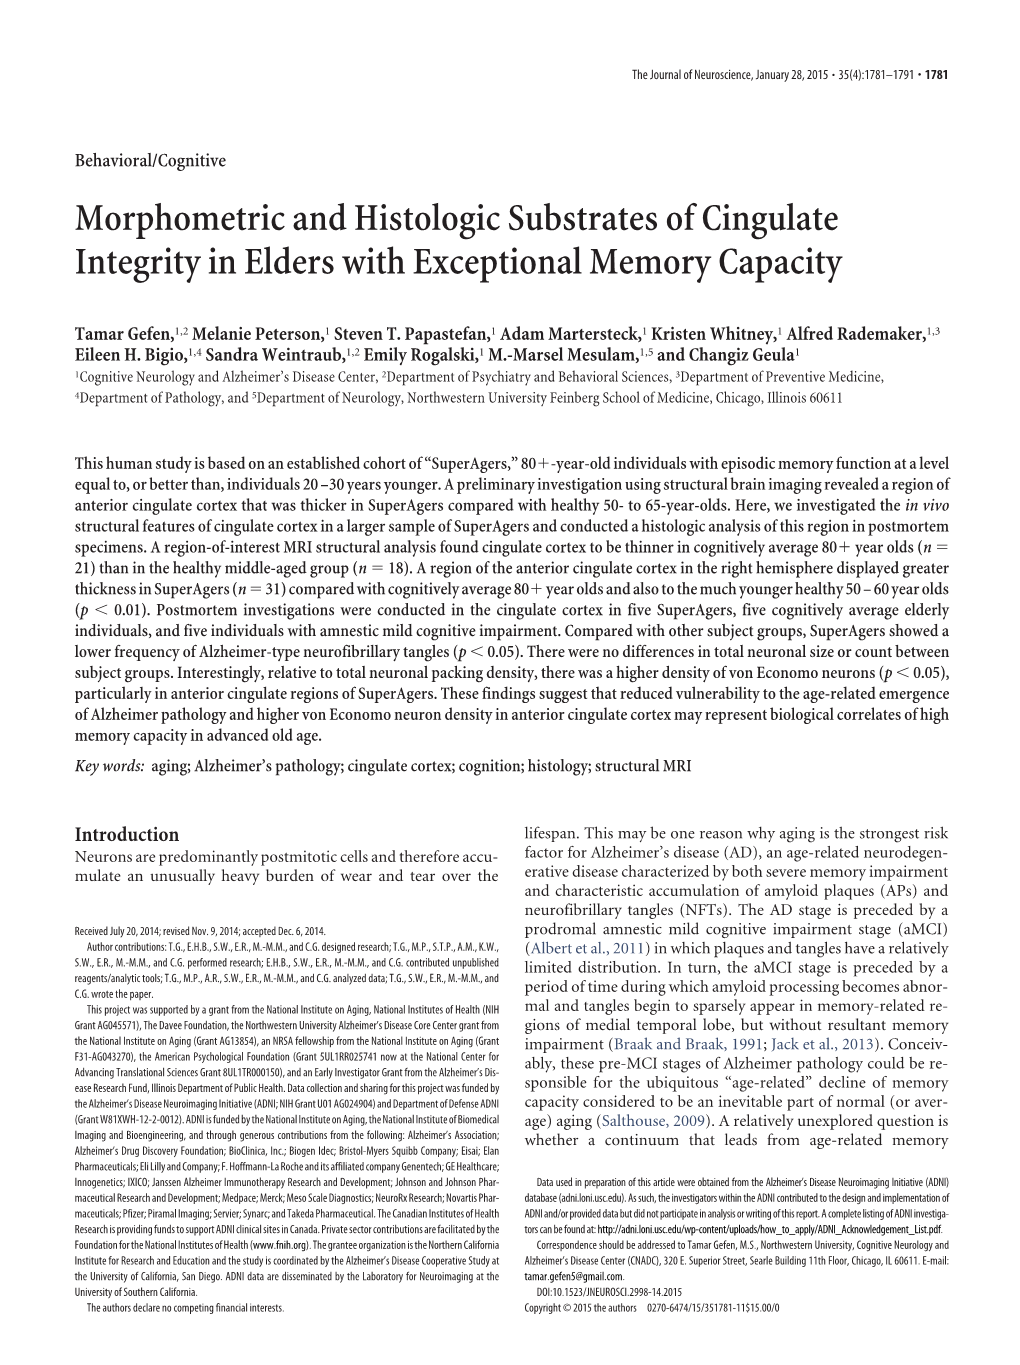 Morphometric and Histologic Substrates of Cingulate Integrity in Elders with Exceptional Memory Capacity